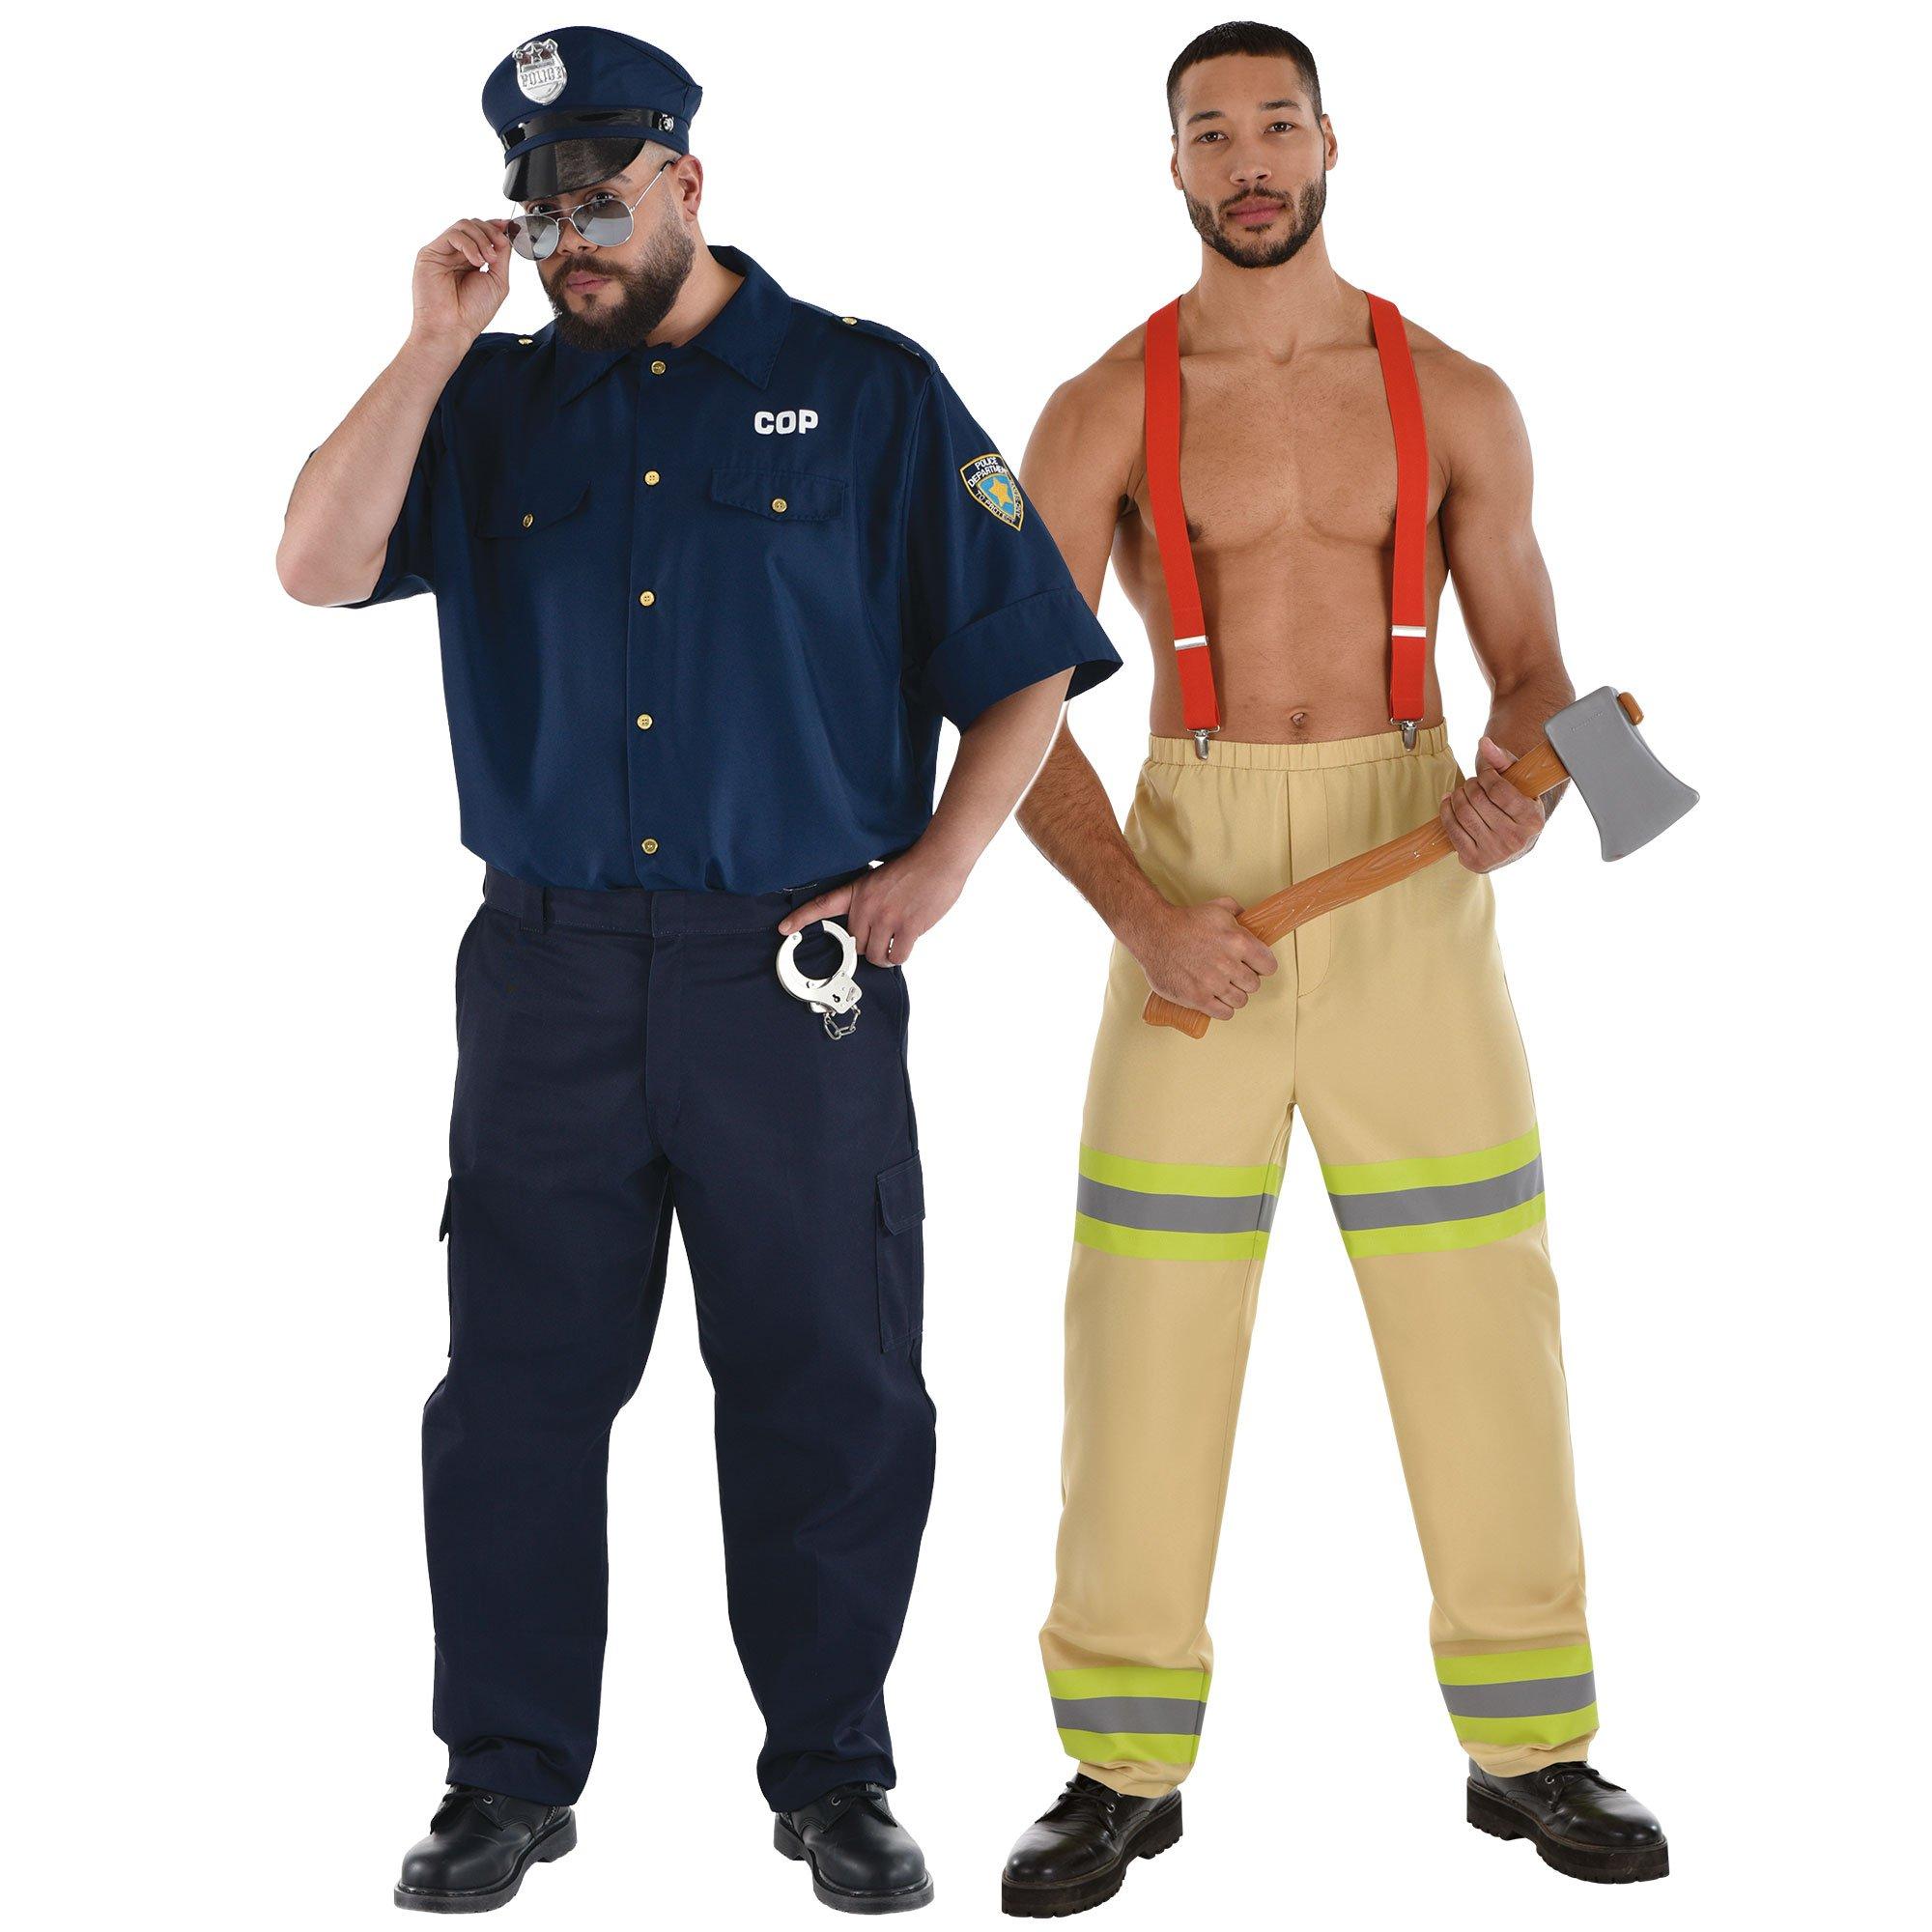 Firefighter & Police Officer Couples Costumes